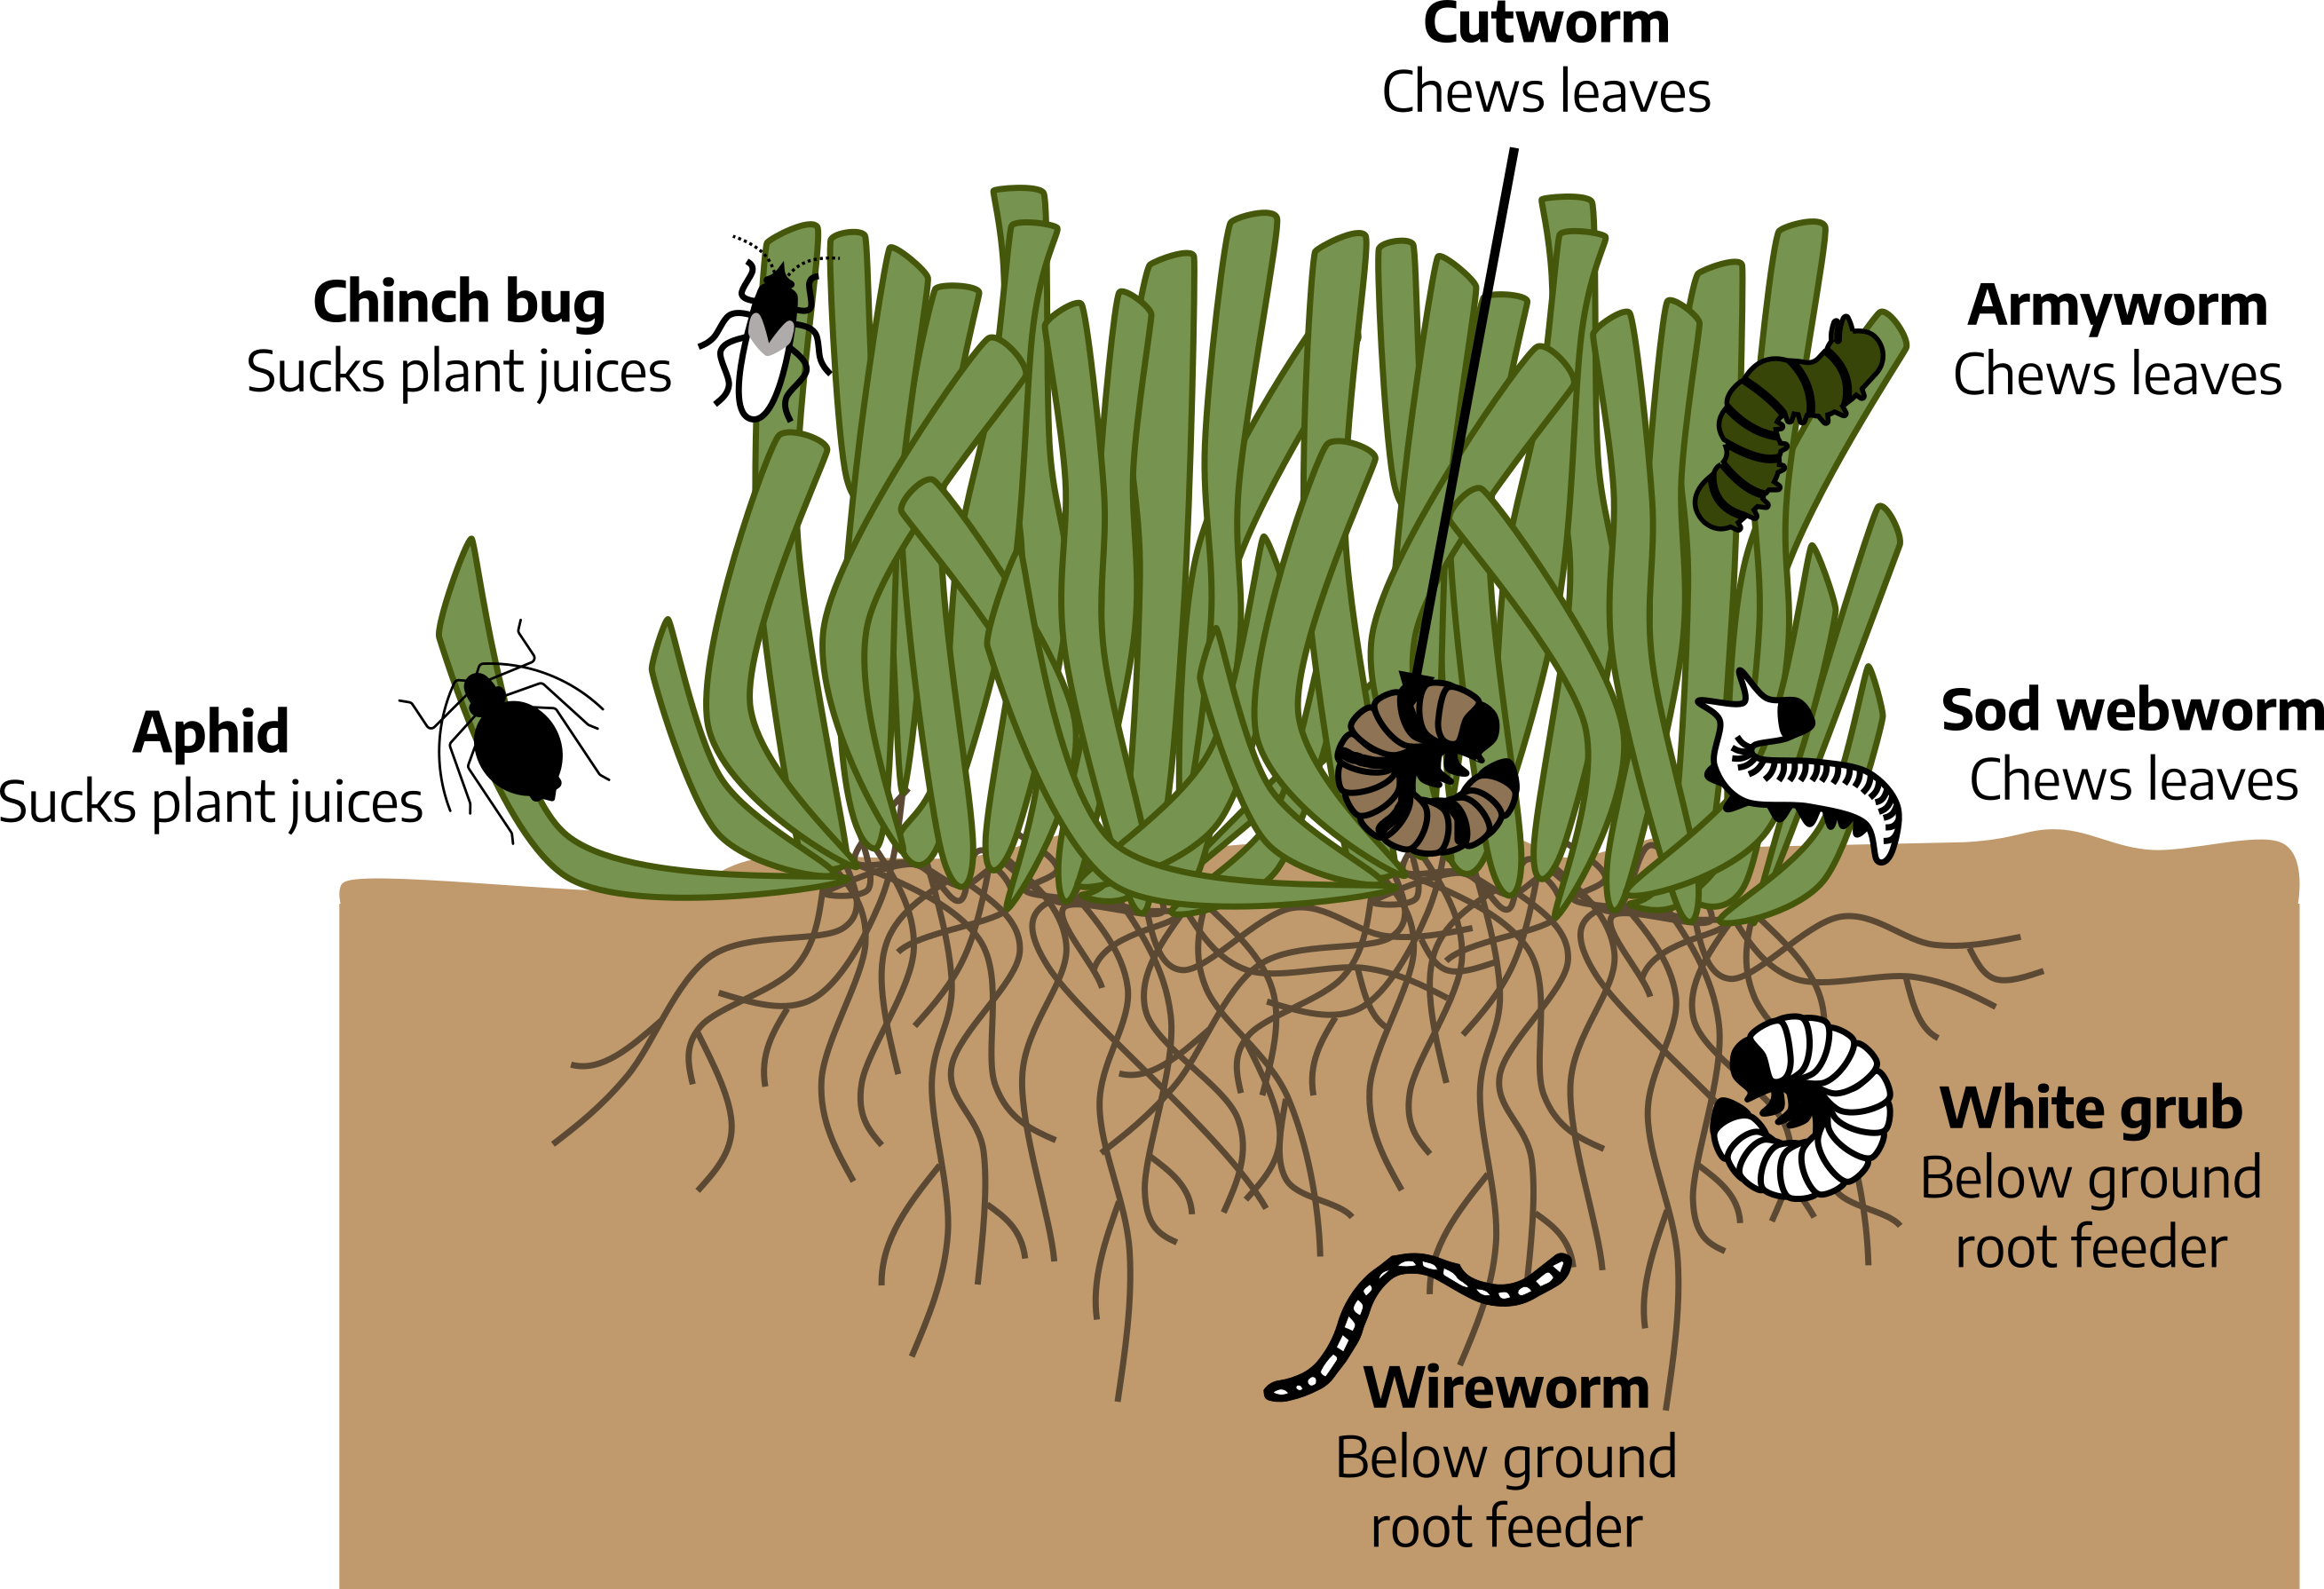 Diagram of a section of grass with roots growing into soil. Small worm-like insect crawls on leaves of grass with label "armyworm: chews leaves." Curled worm-like insect sits near surface of soil with label "cutworm: chews leaves." Small insect clings to leaf with label "chinch bug: sucks plant juices." Black insect with narrow limbs clings to leaf with label "aphid: sucks plant juices." Slug-like insect sits on soil surface with label "sod webworm: chews leaves." Round, white grub clings to roots underground with label "white grub" below ground root feeder." Small worm at lower level of roots with label "wireworm: below ground root feeder."